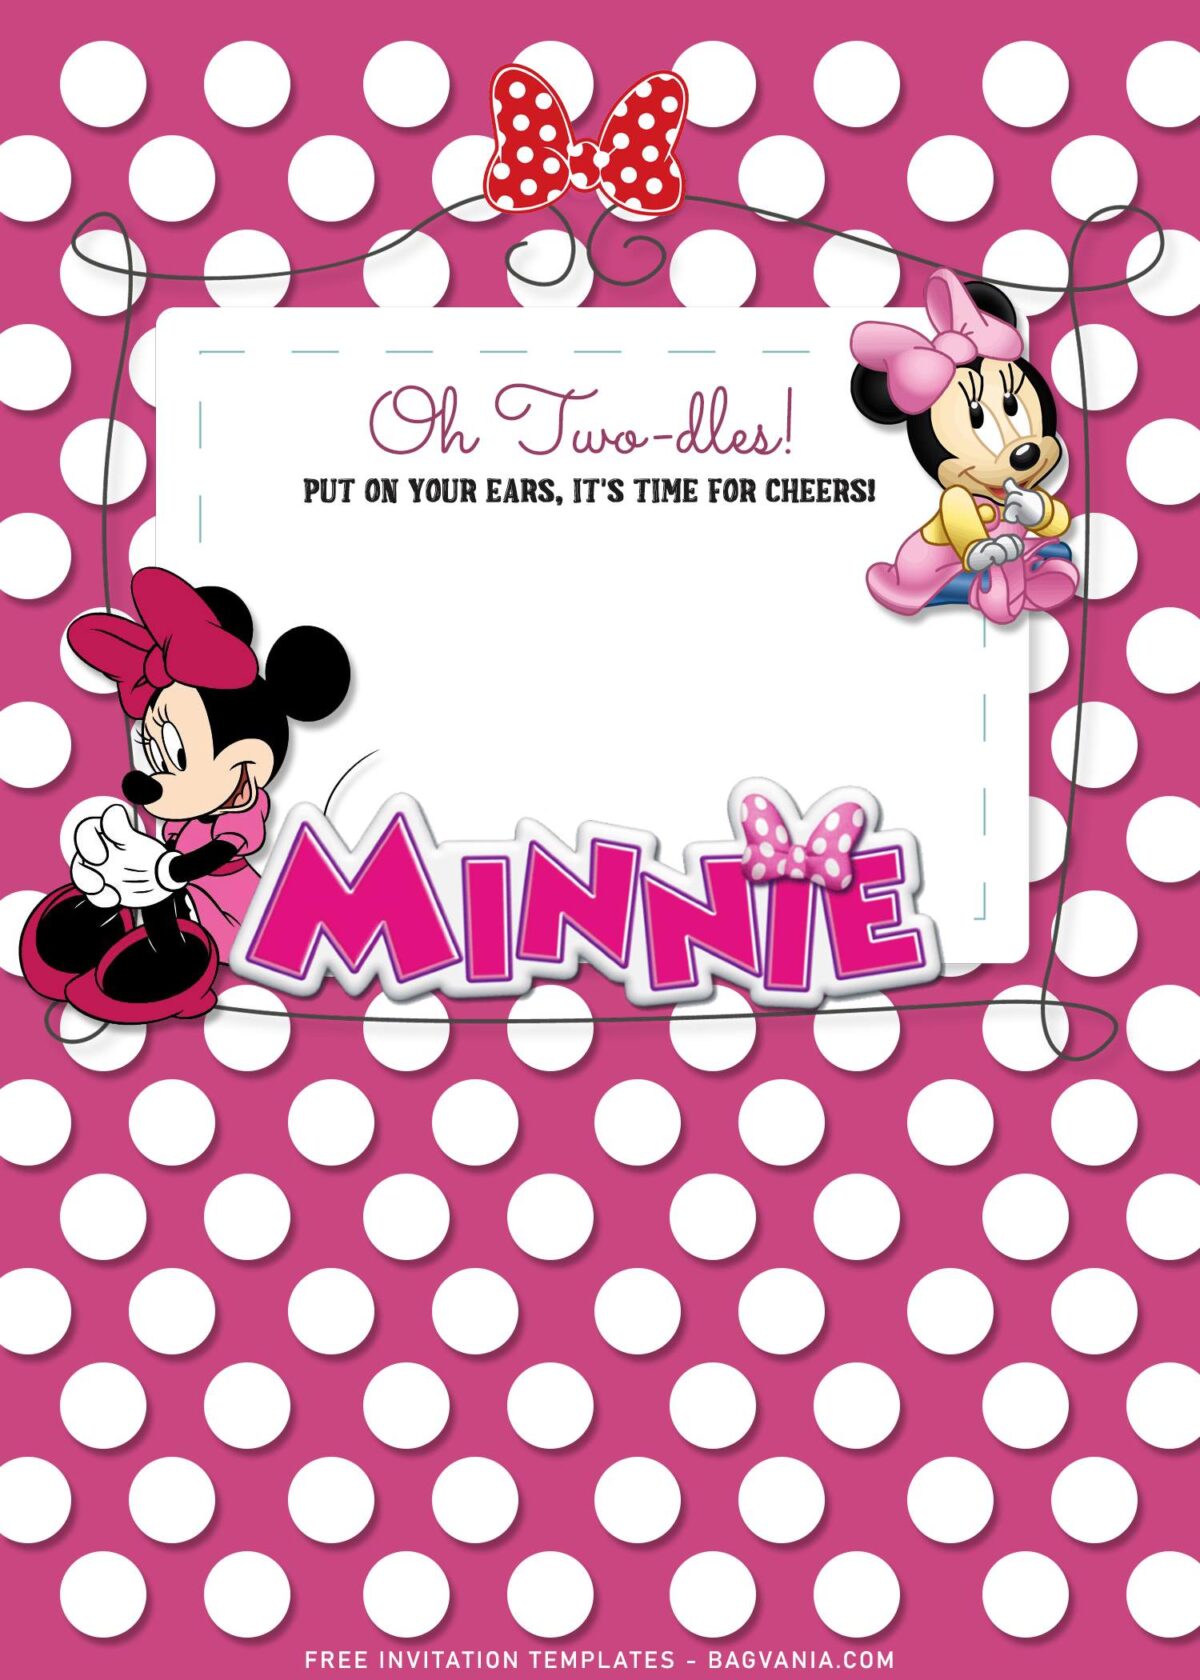 7+ Minnie Mouse Birthday Invitation Templates For Girls Birthday Of All Ages with pink background and cute text frame